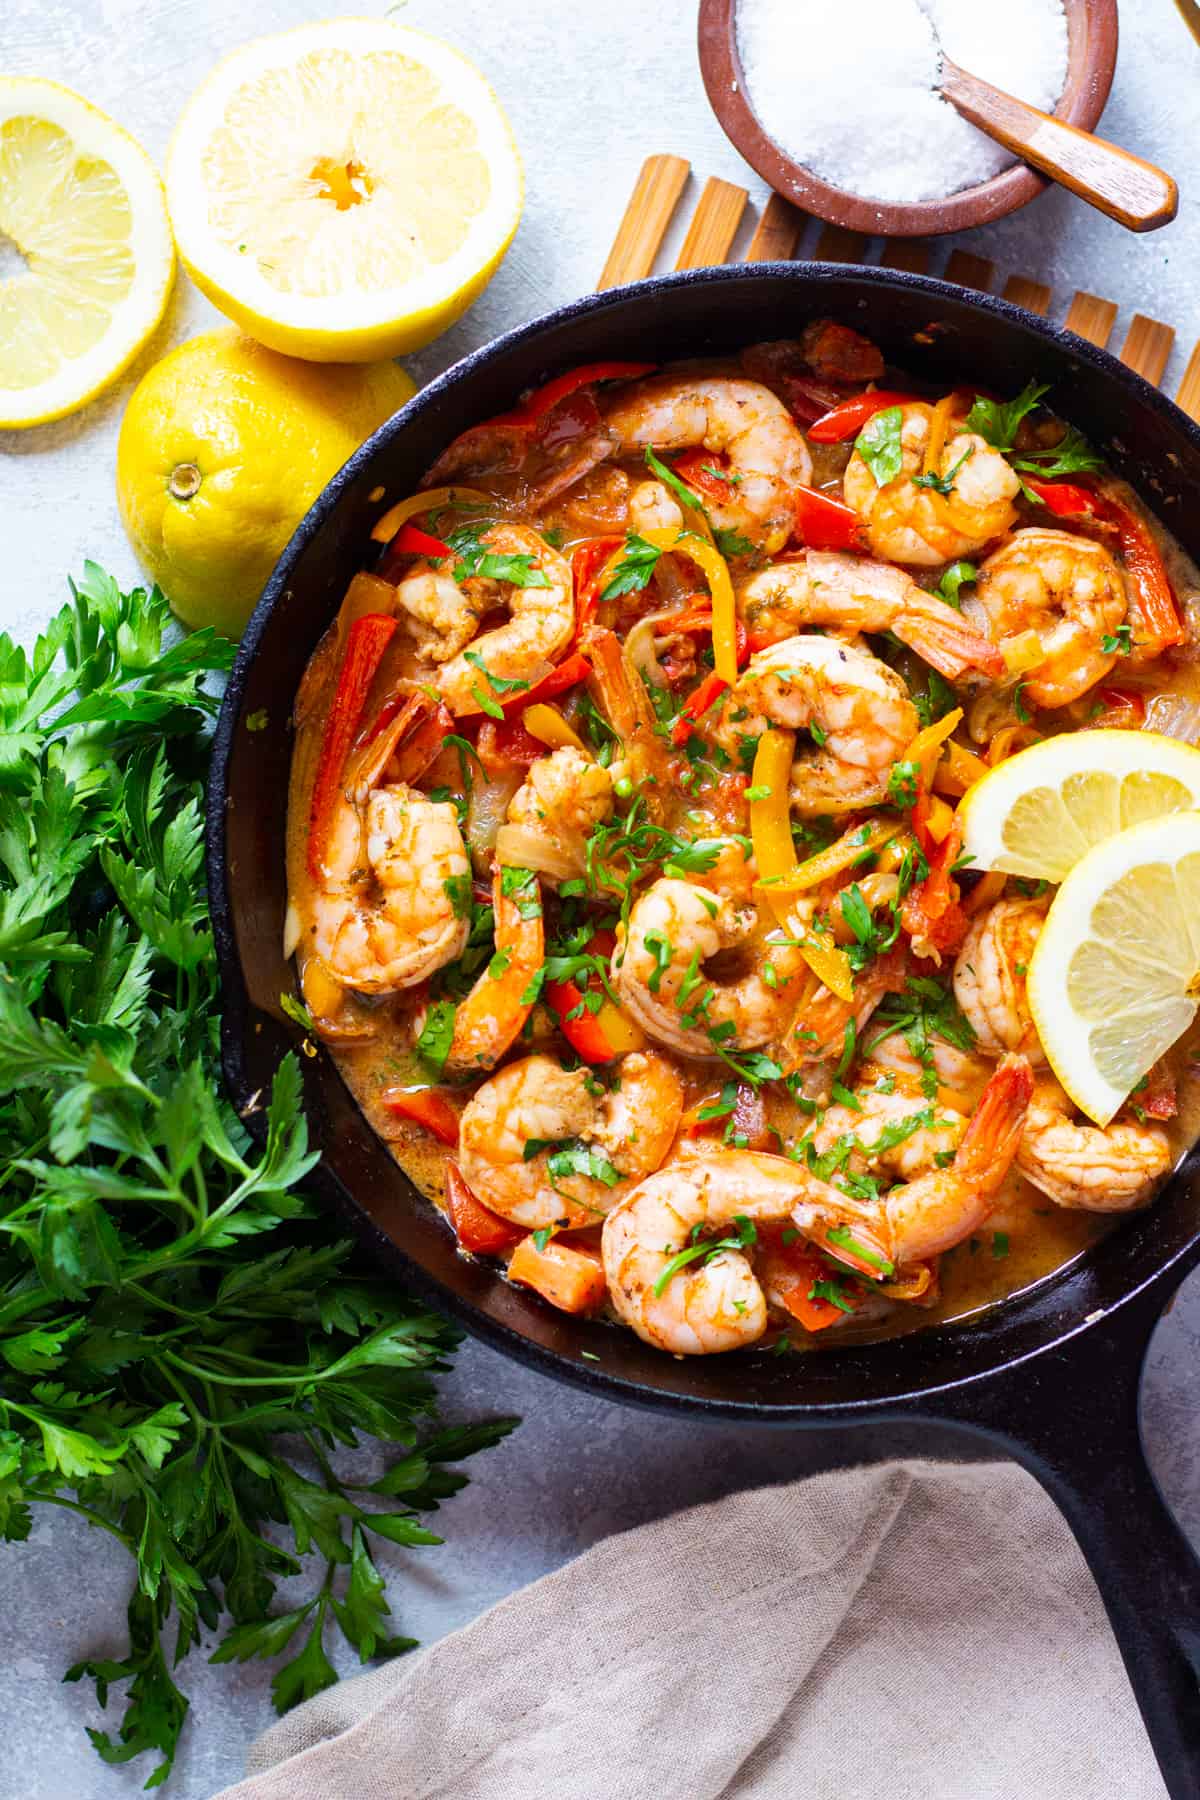 Ready in just 30 minutes, this Mediterranean shrimp recipe is packed with flavor! Large shrimp cooked in a pepper and tomato sauce is tasty.
